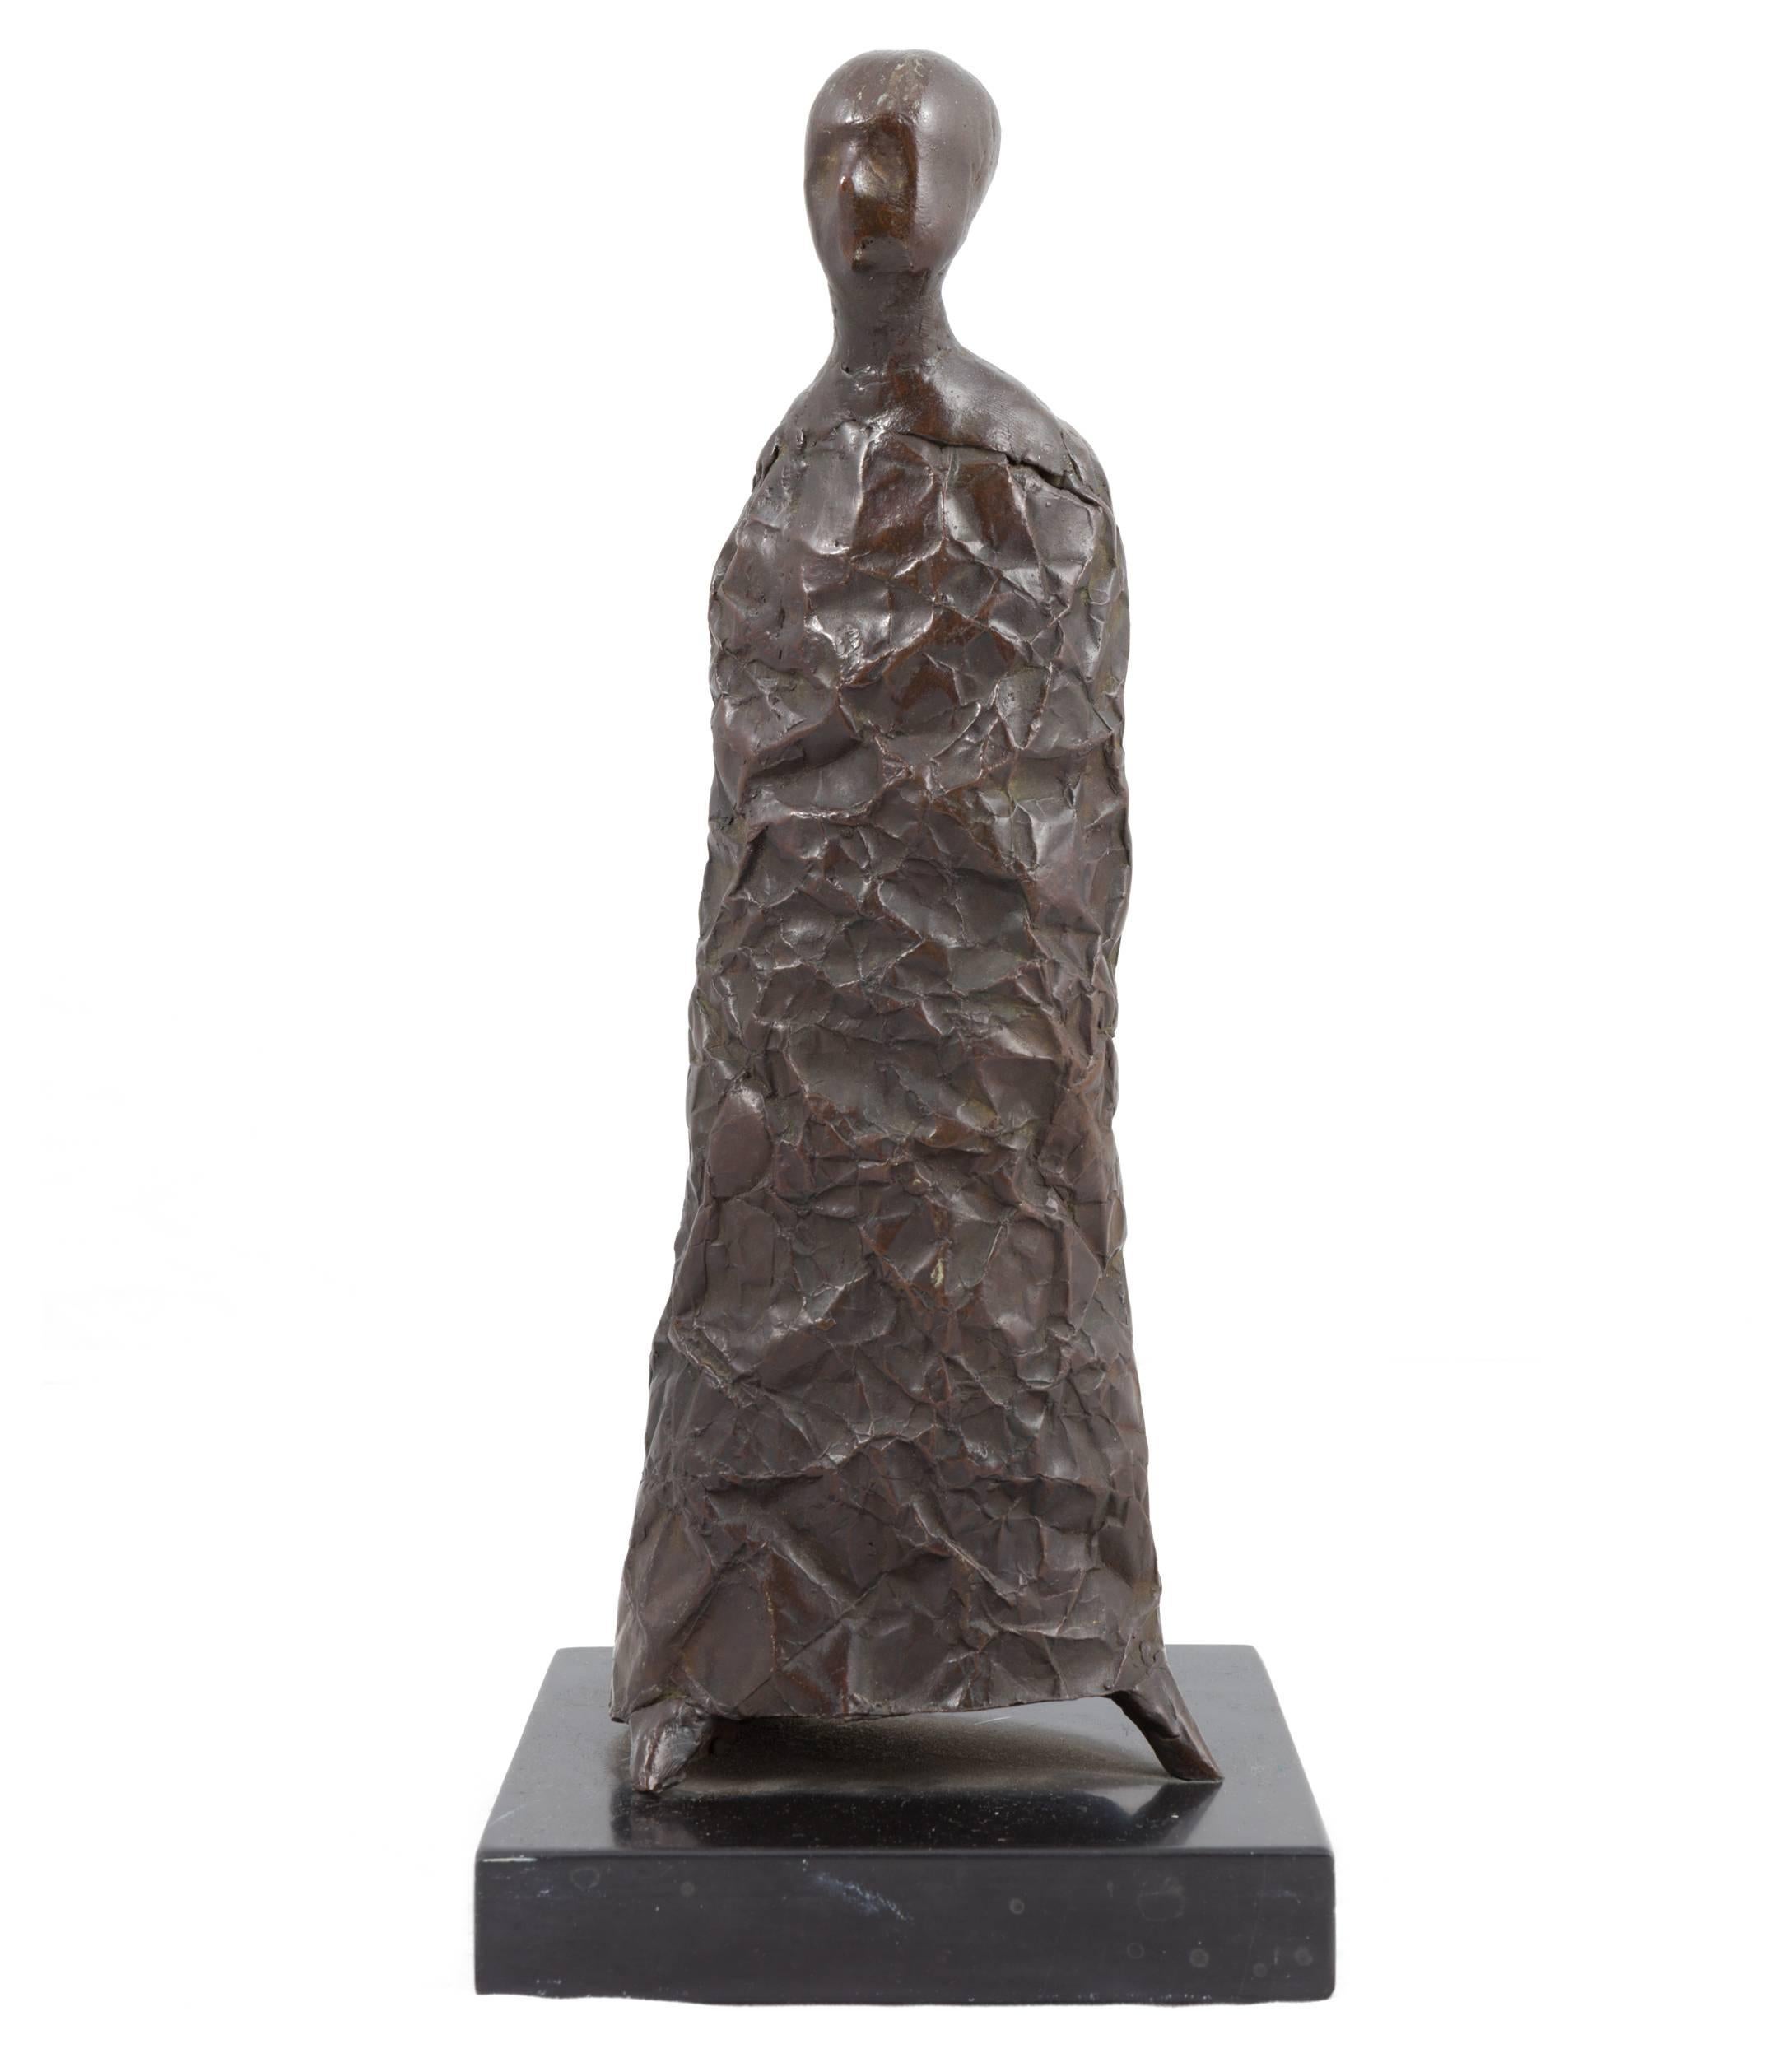 William King was a sculptor in a variety of materials whose human figures traced social attitudes through the last half of the 20th century. Mr. King’s work is in the collections of the Metropolitan Museum of Art and the Museum of Modern Art in New